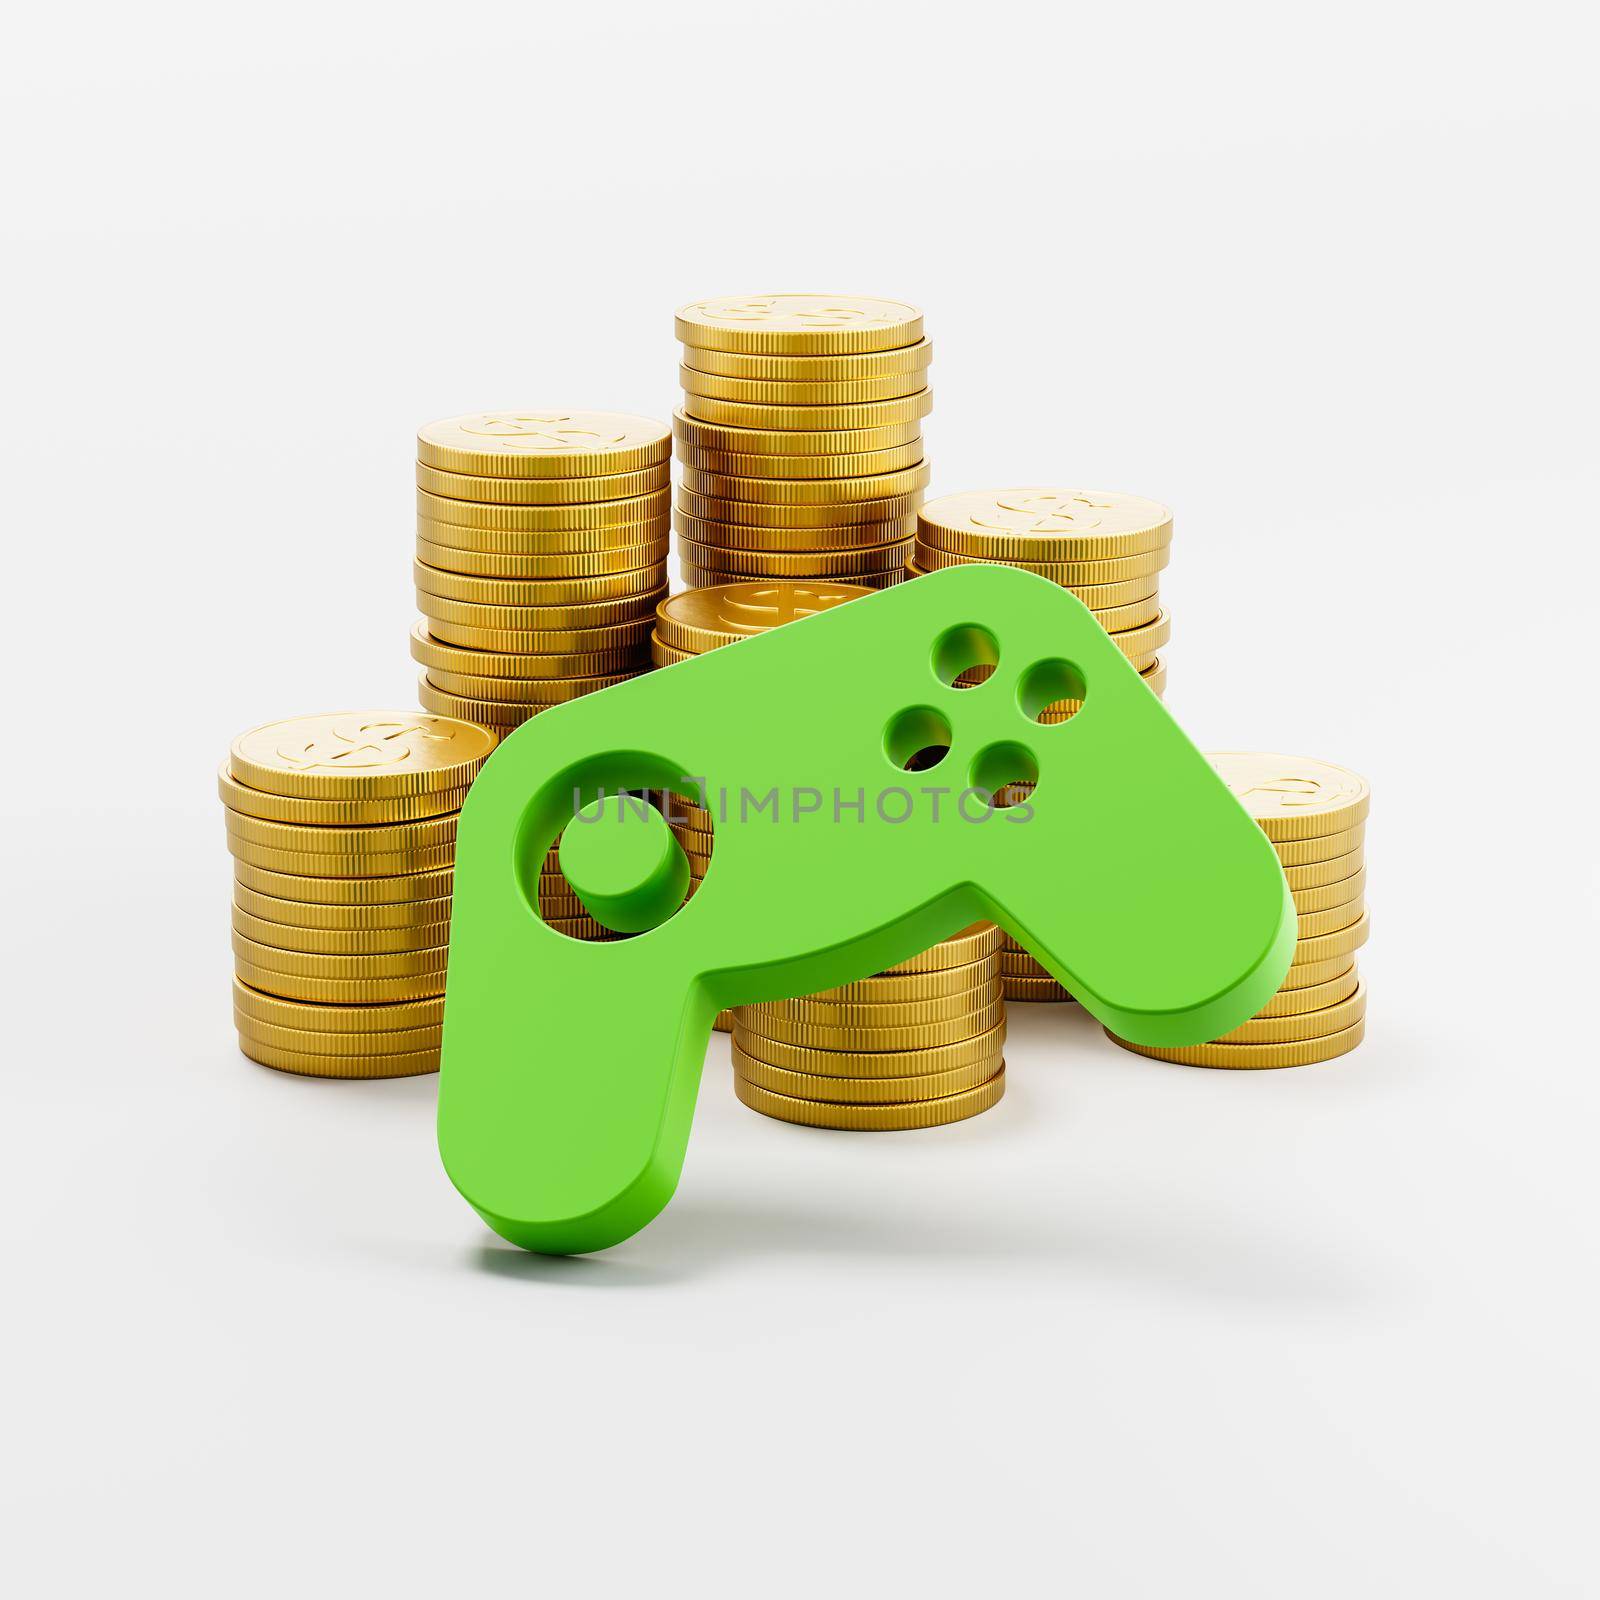 Gamepad Controller ahead of Stacks of Coins on Light Gray Background by make